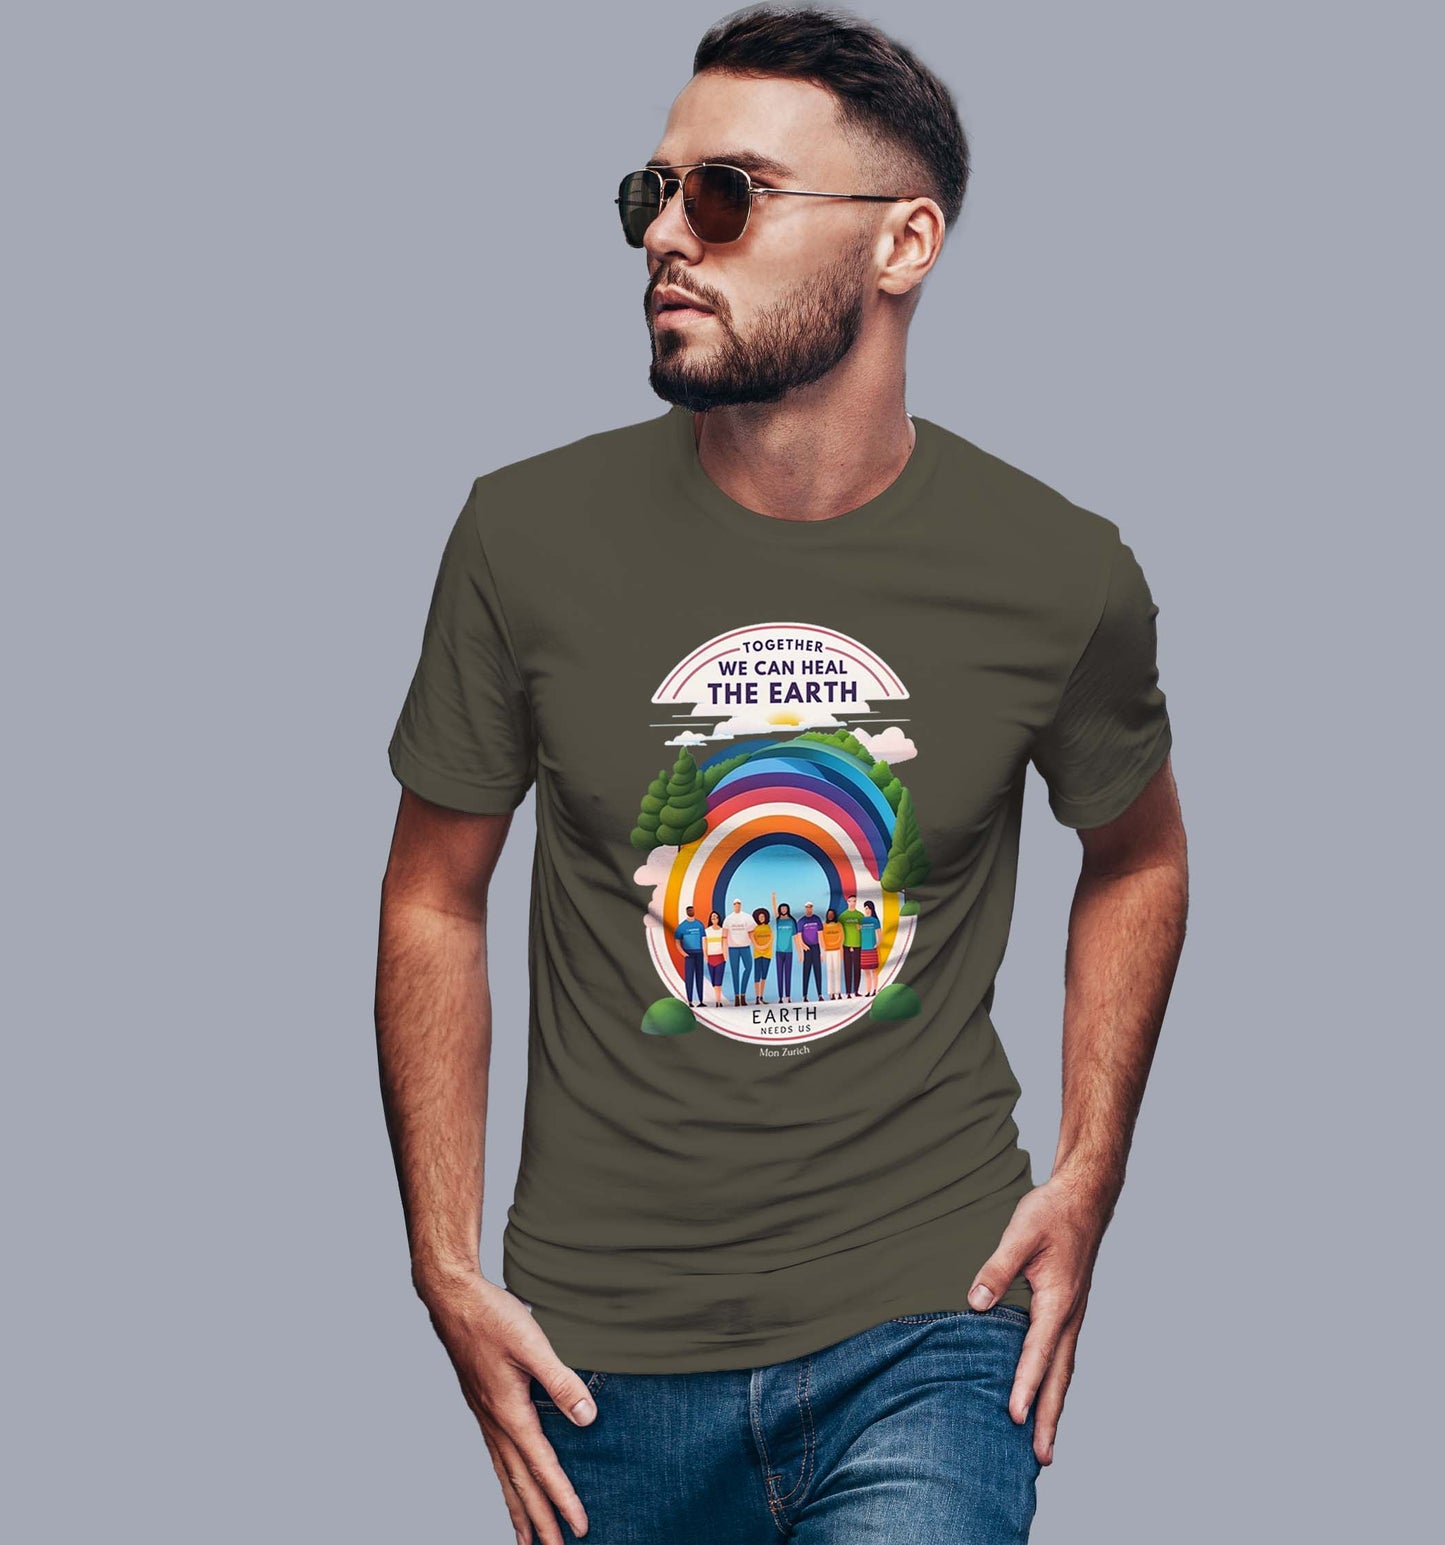 Together We Can Heal the Earth T-shirt in Dark - Mon Zurich Originals